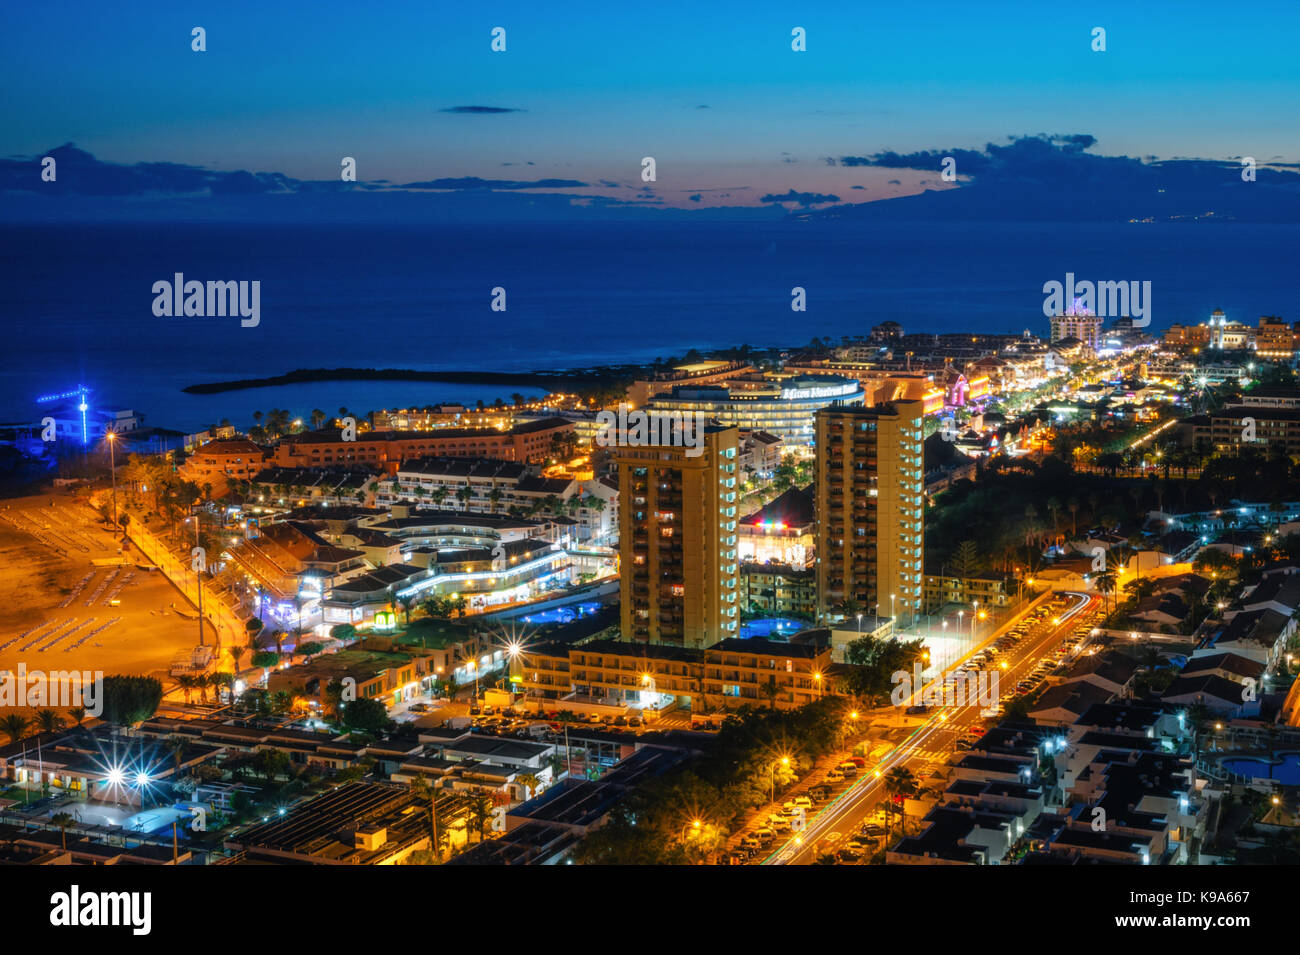 Panoramic view of the Illuminated Las Americas at night with clubs, hotels  and bars in Tenerife island, Spain Stock Photo - Alamy